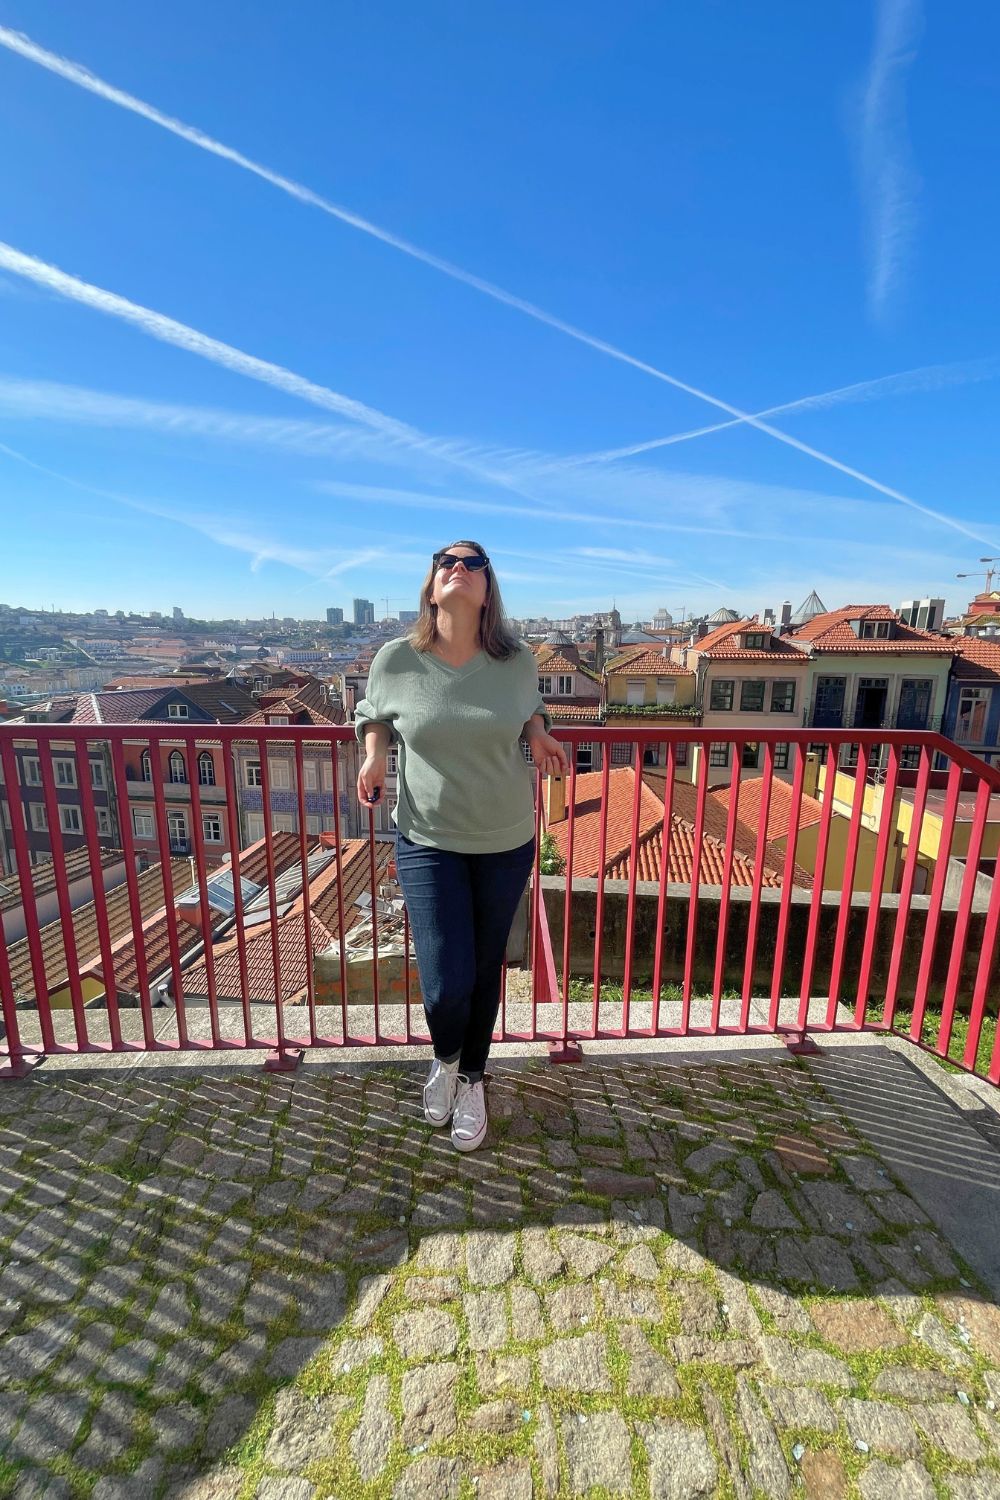 A woman on her own standing against a red fence with the city of porto in the background.